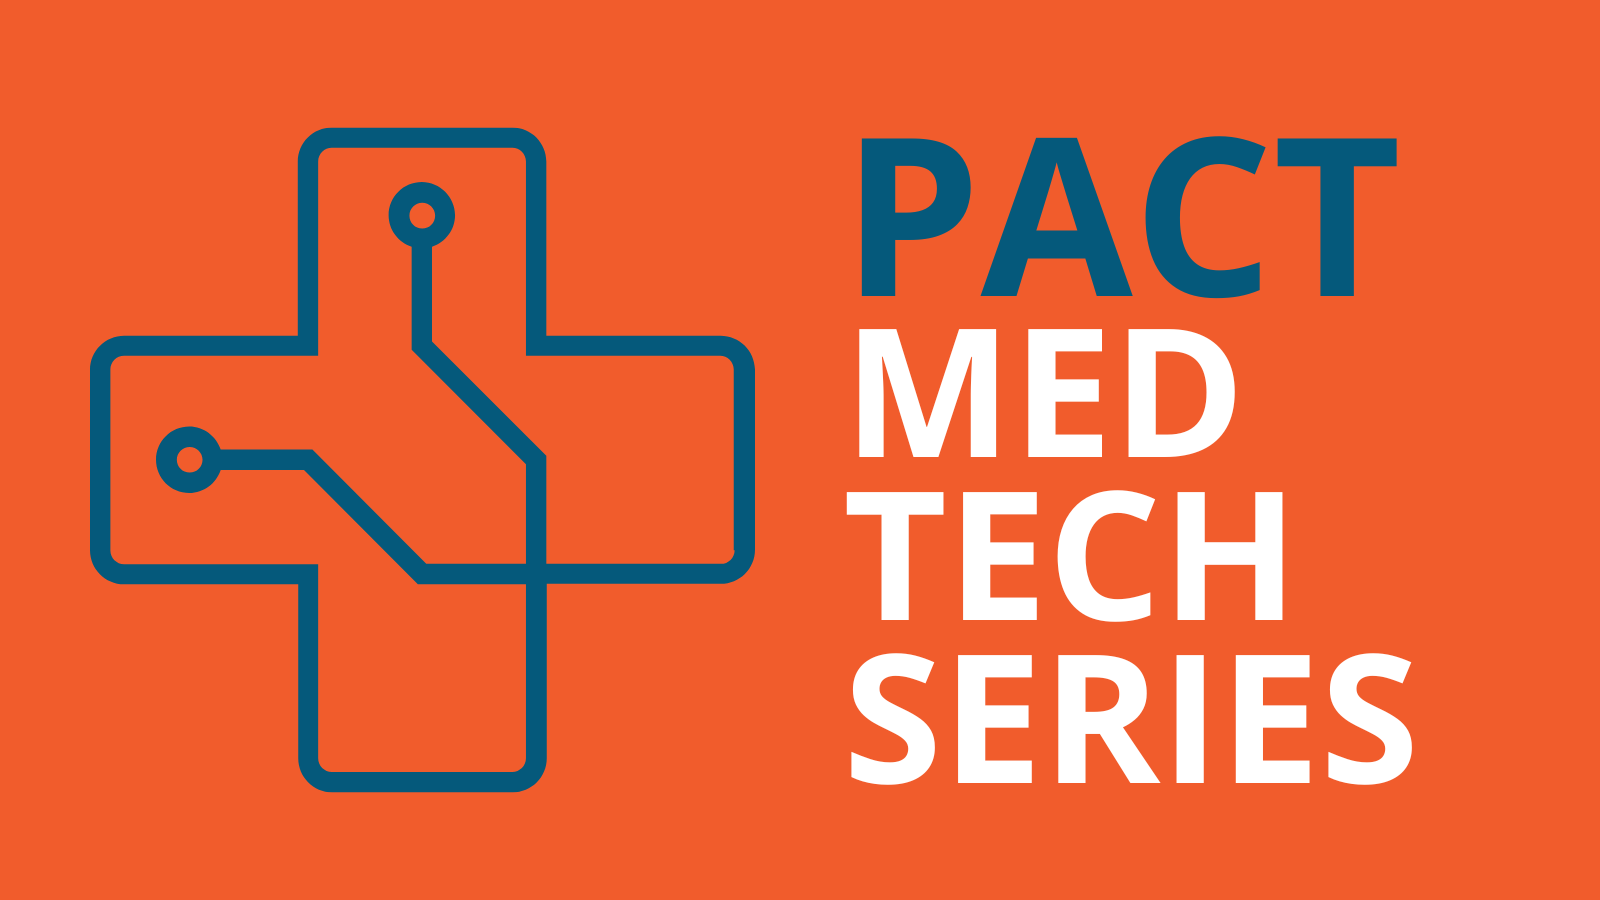 Shares the logo of the PACT MedTech series